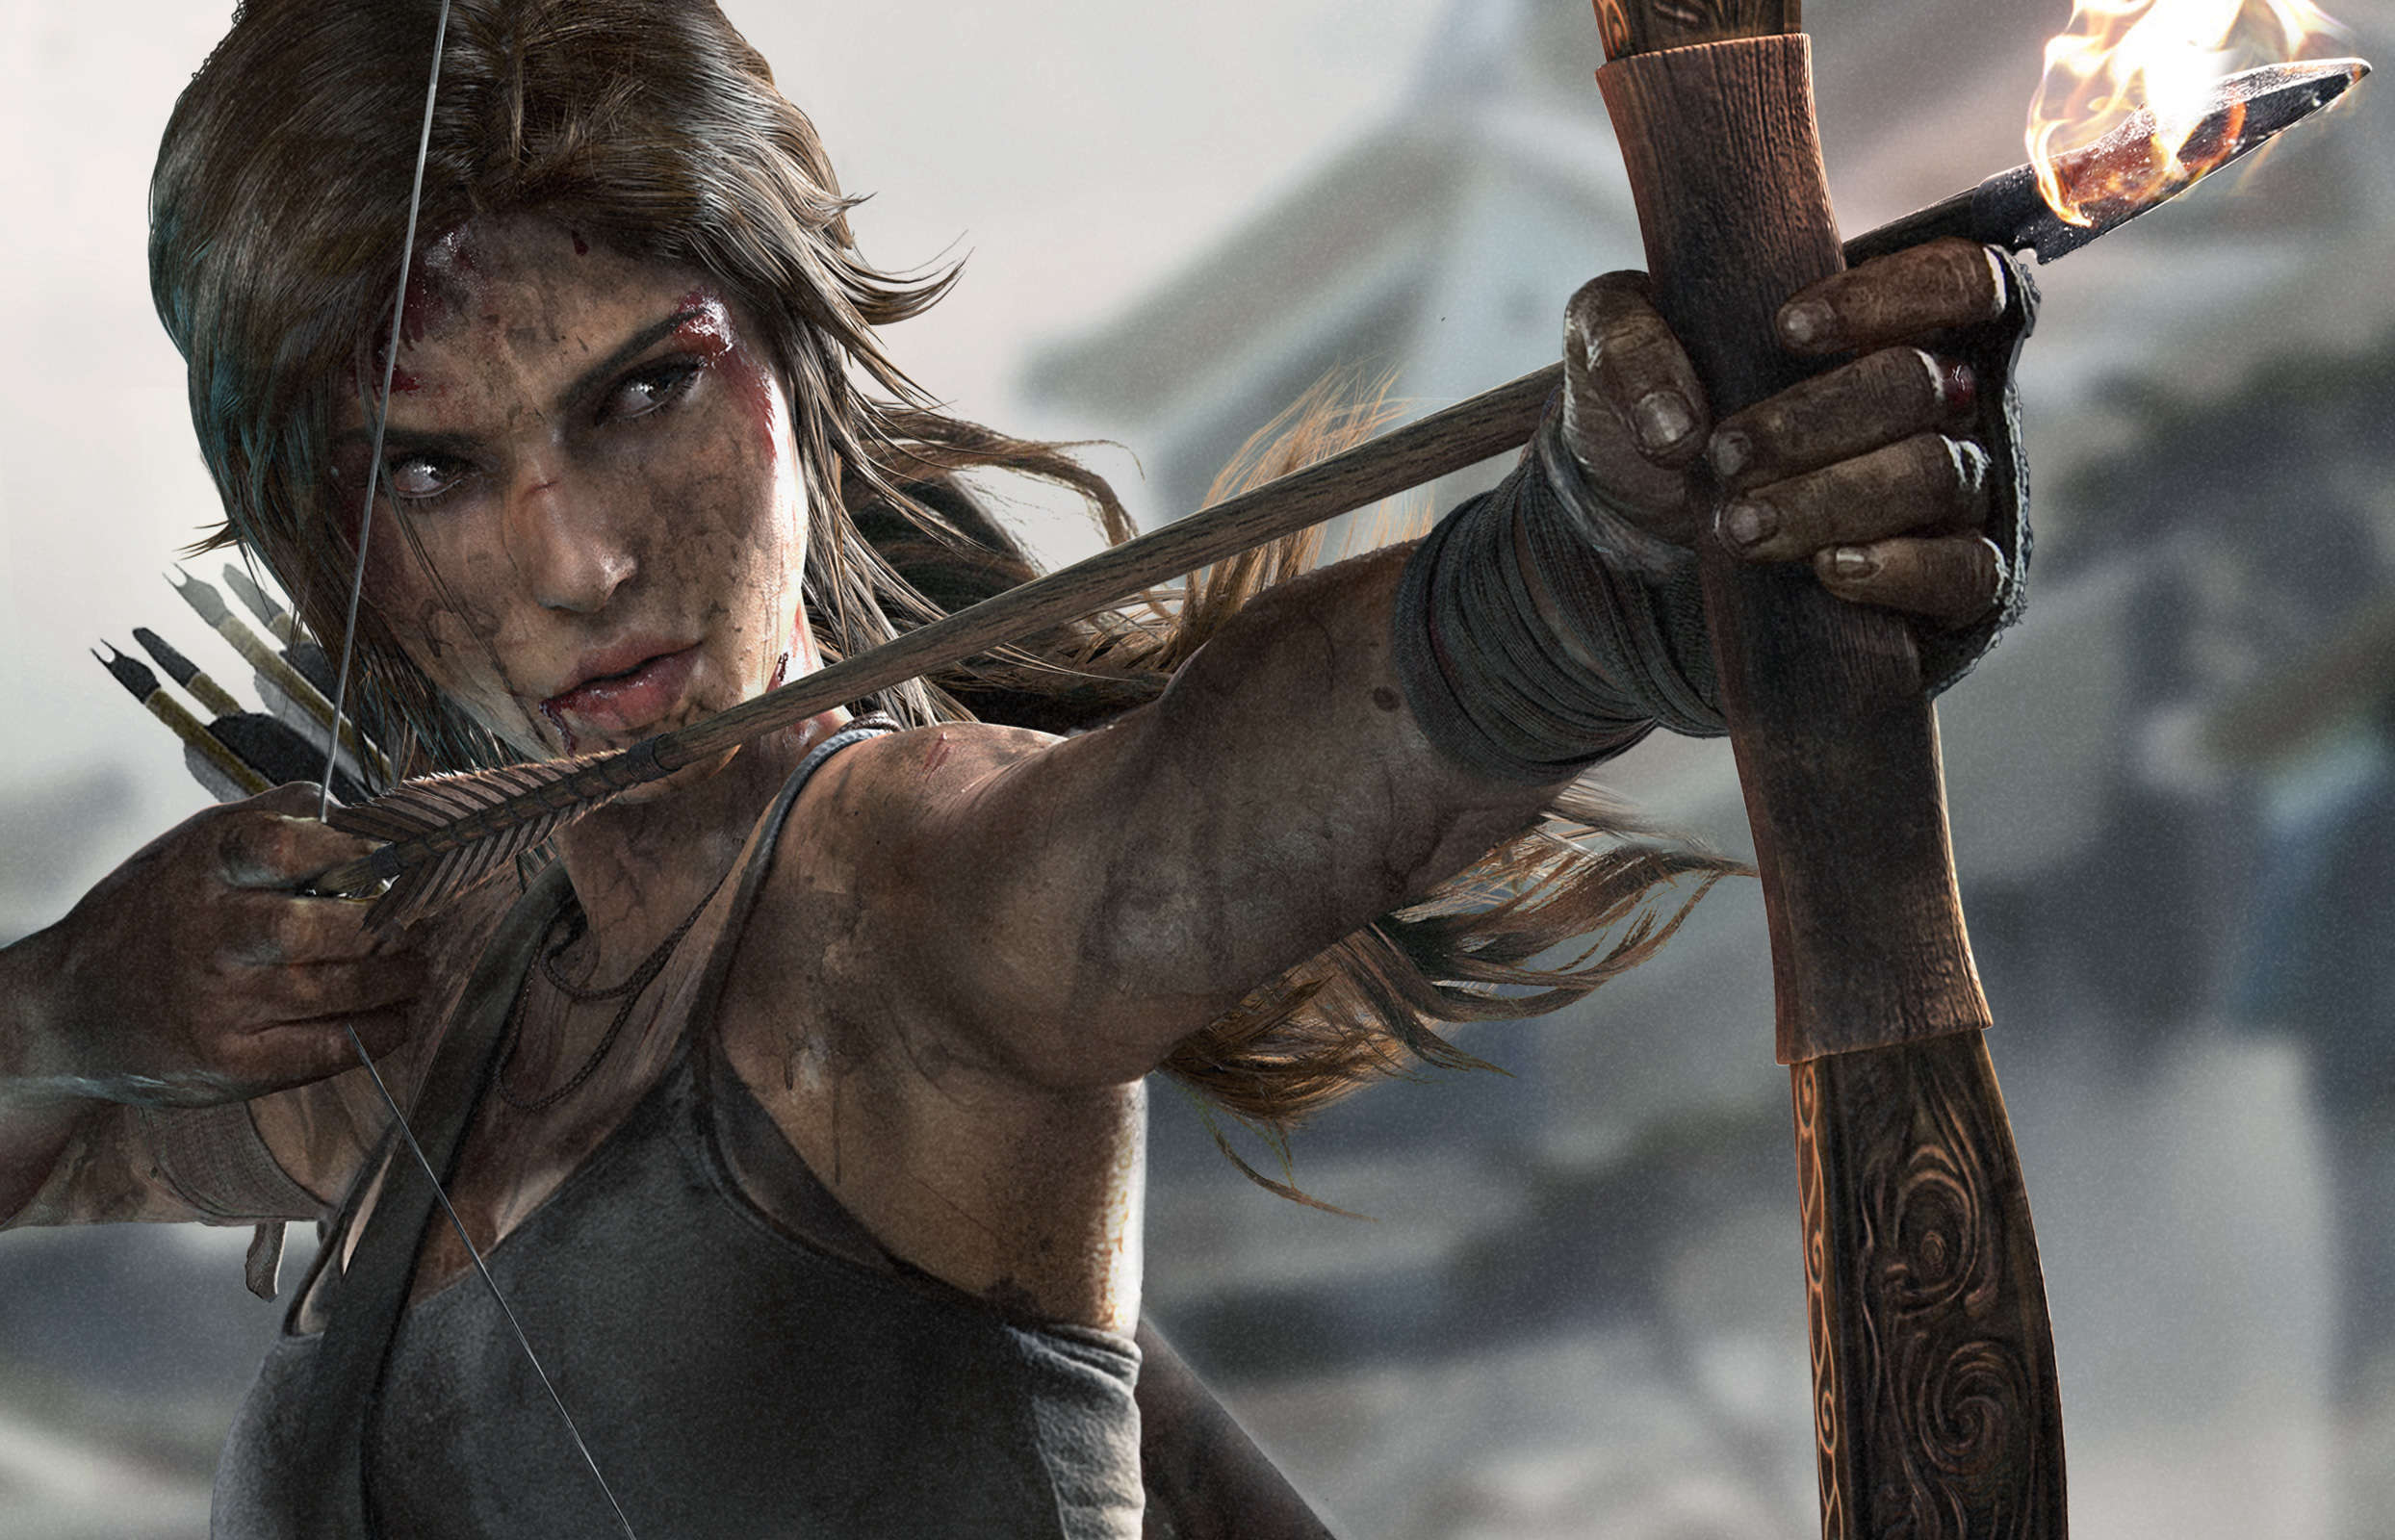 Rise of the Tomb Raider Add-On Content Detailed - Xbox Wire